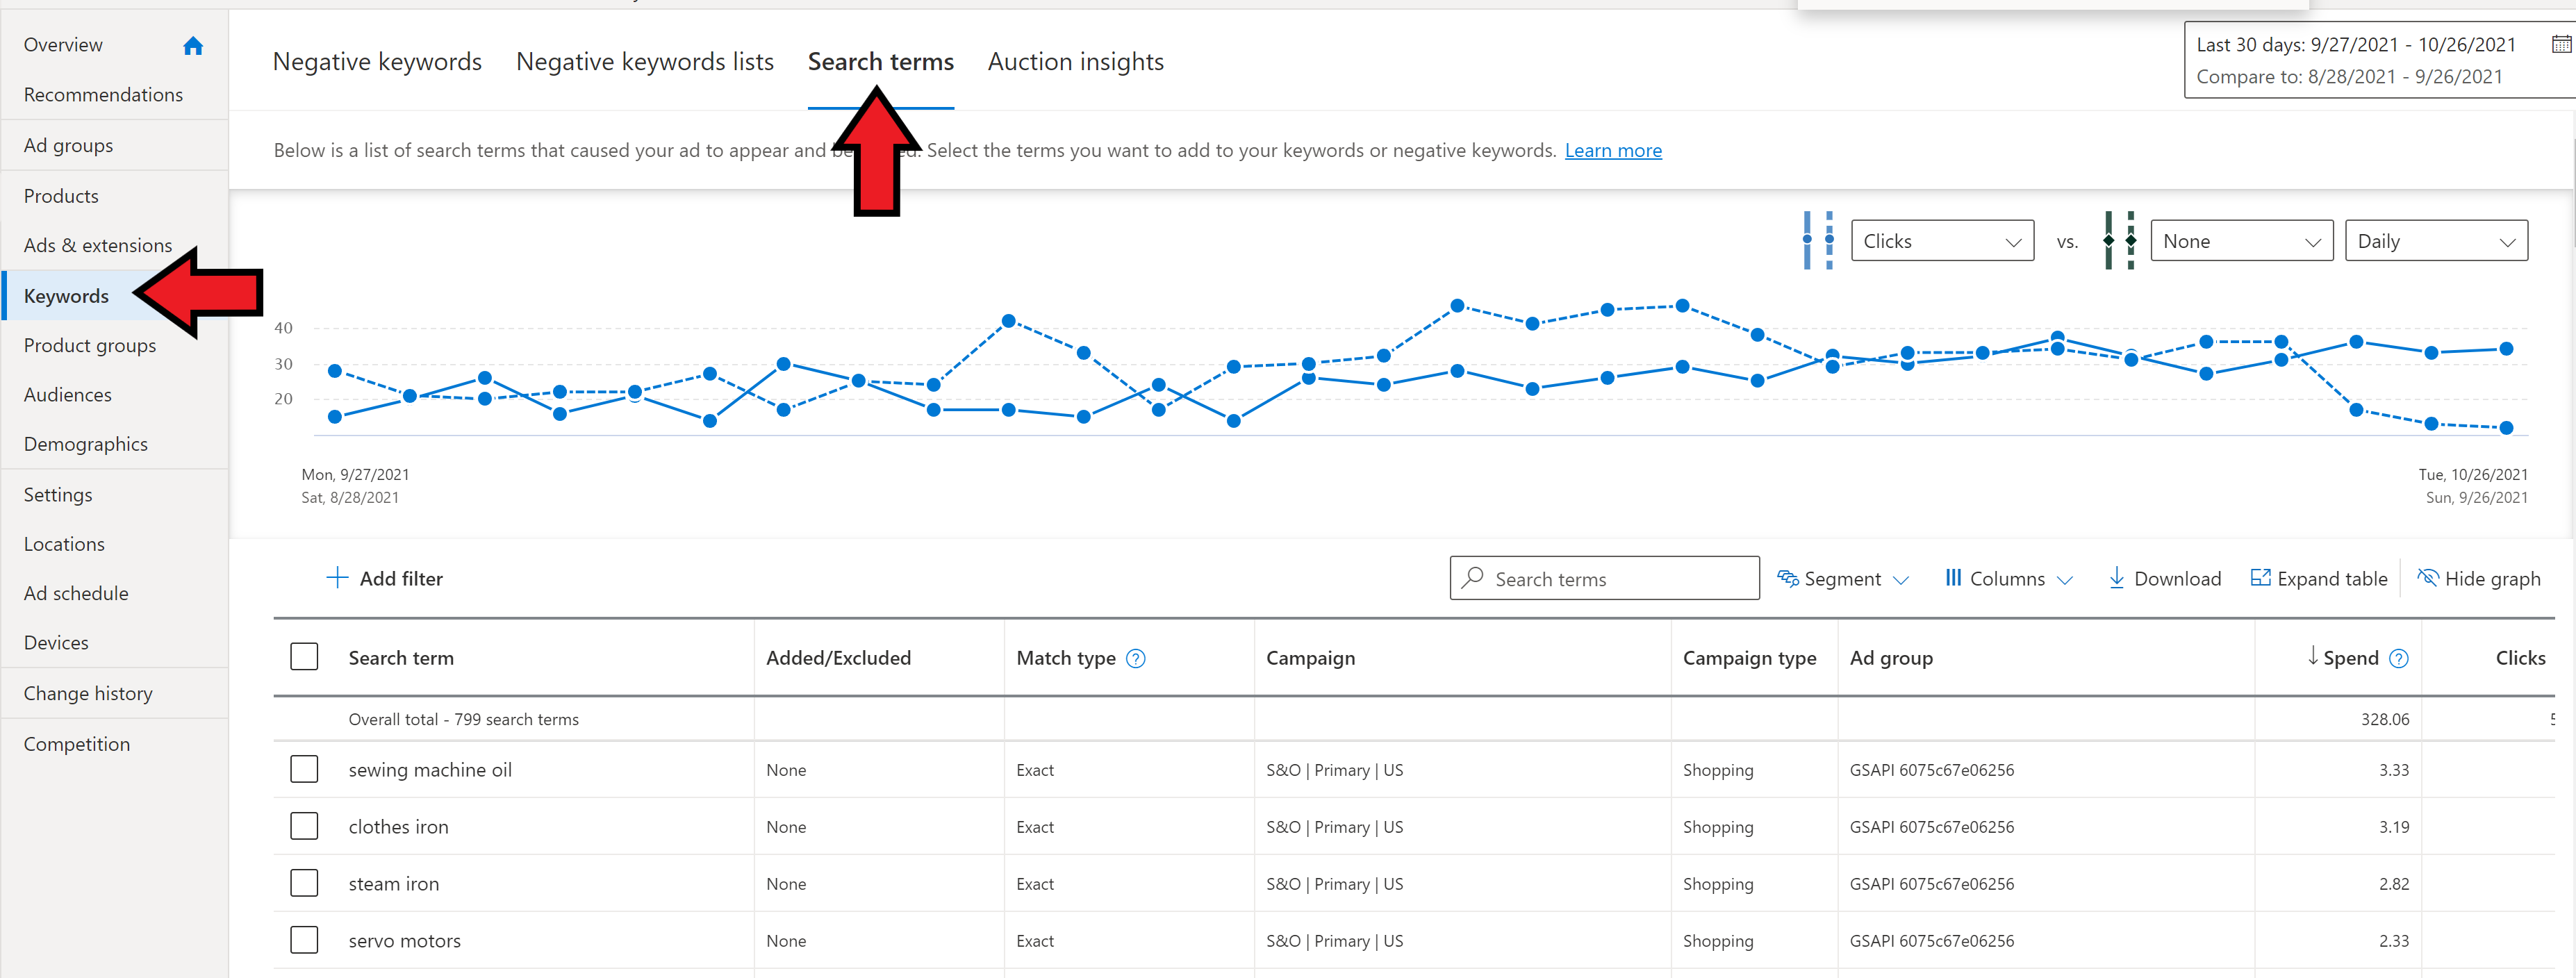 Search terms report in the Microsoft Advertising interface